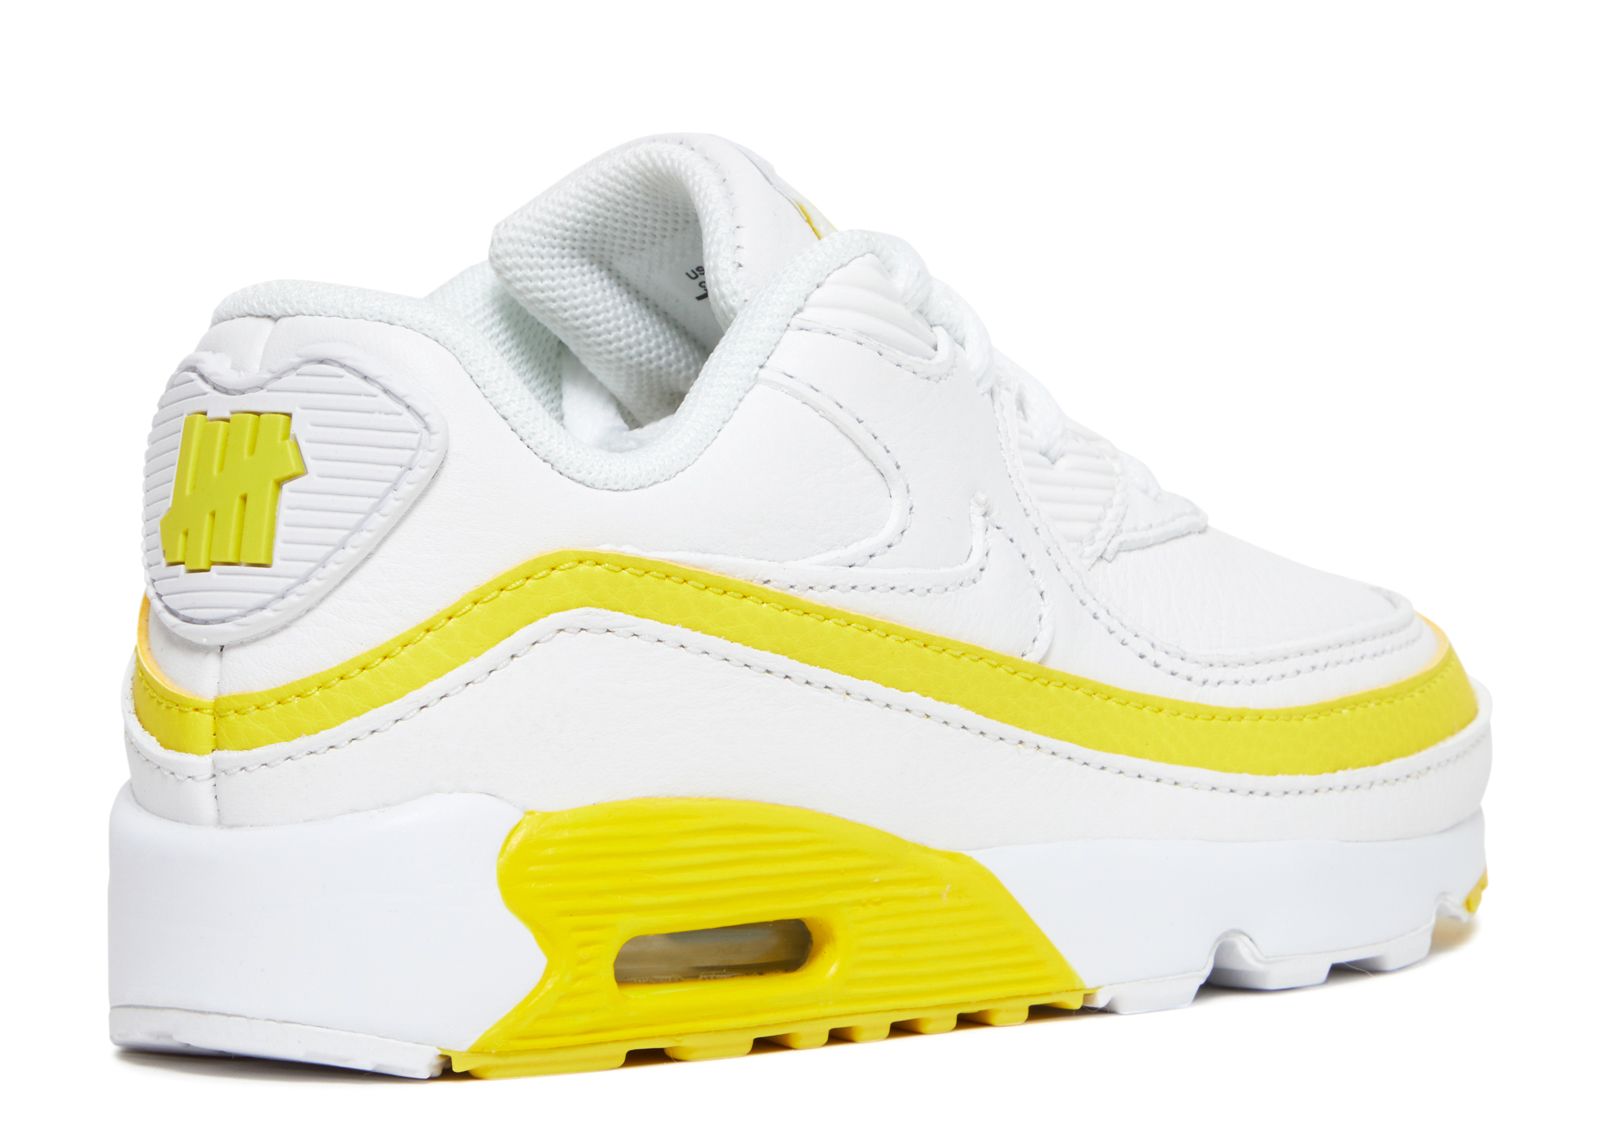 Undefeated X Air Max 90 BT 'White Optic Yellow' - Nike - CQ4615